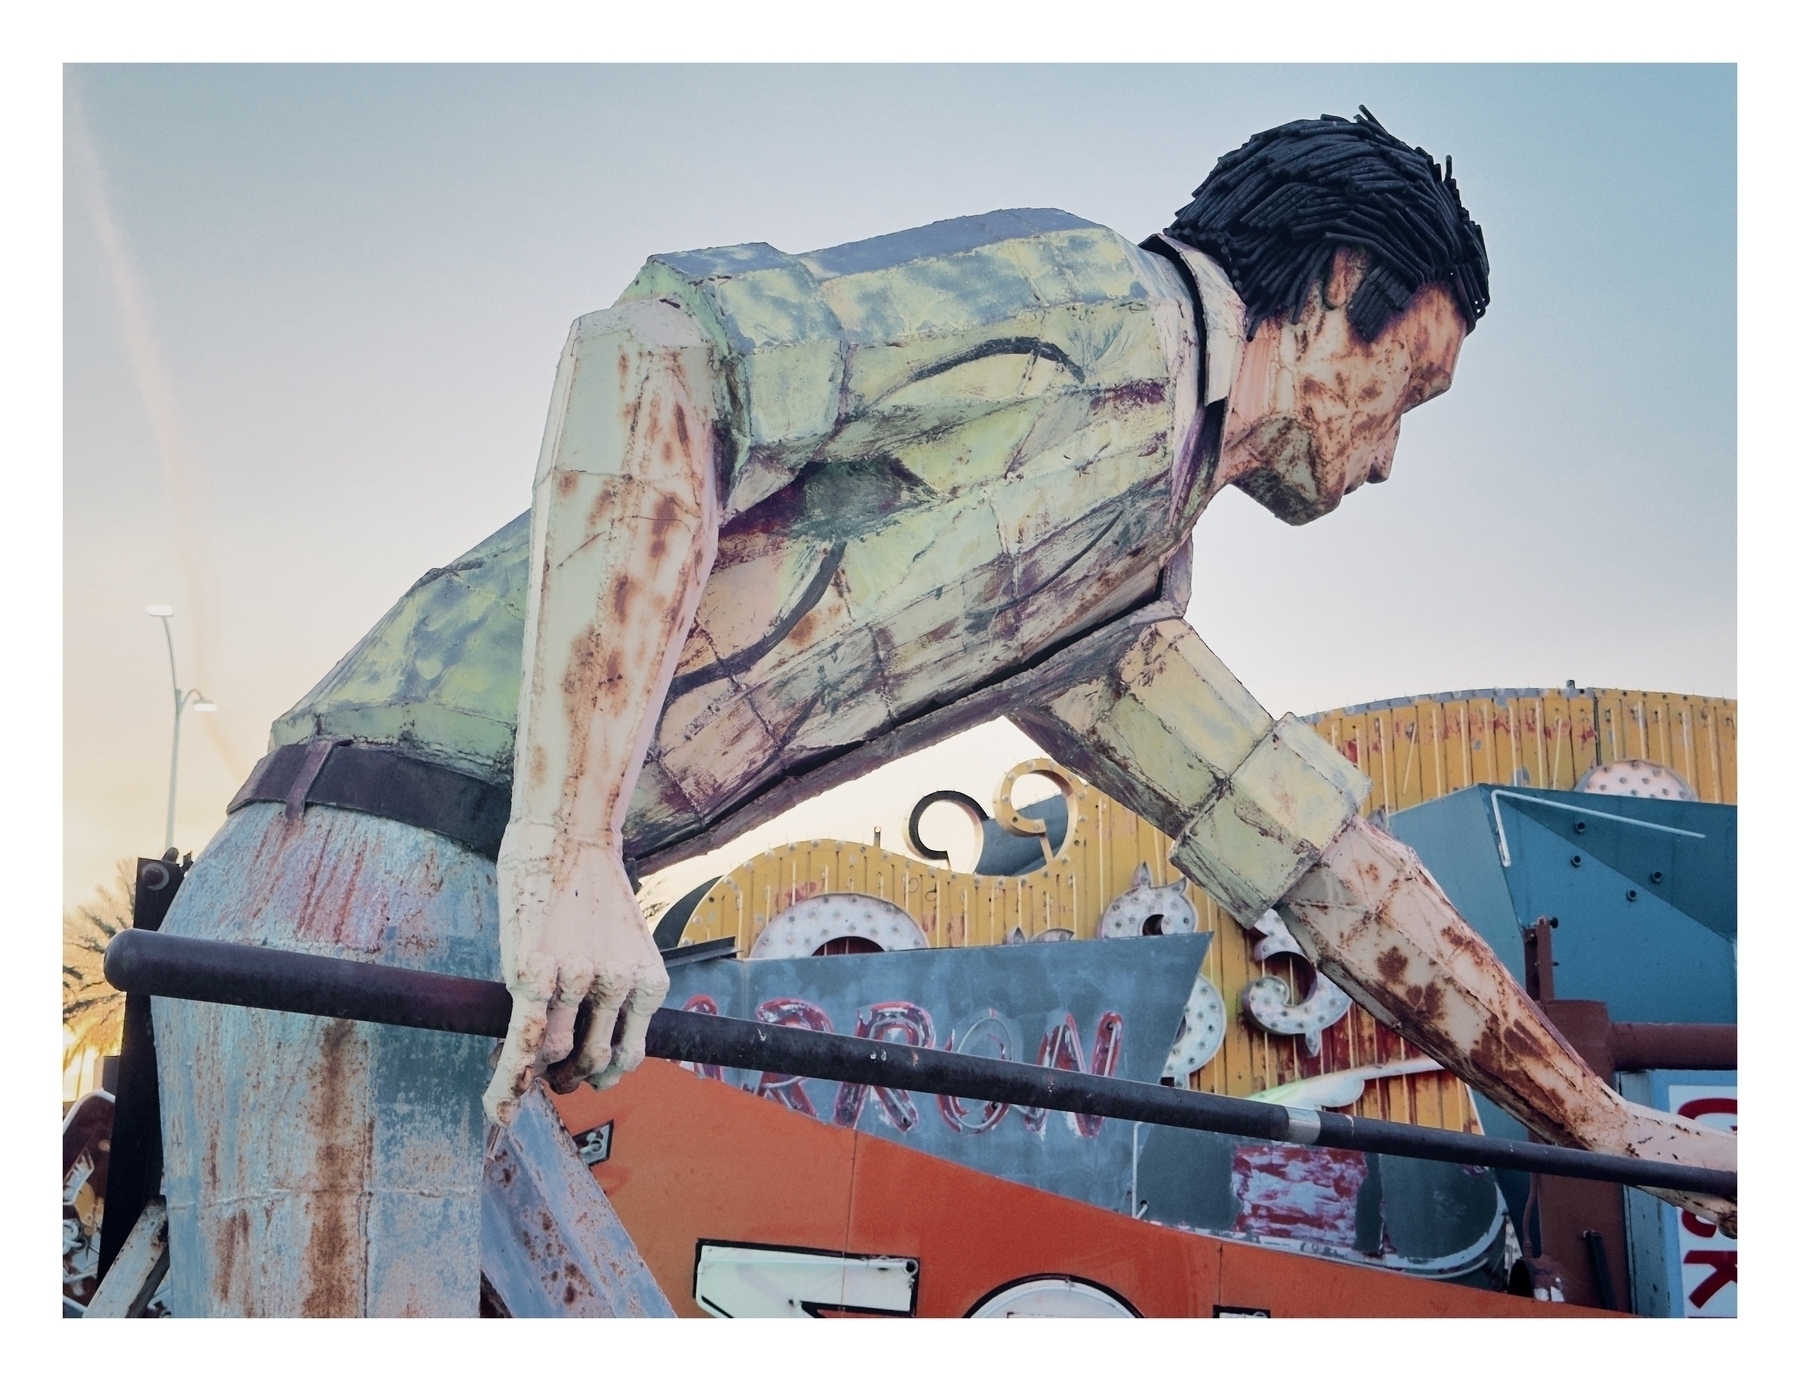 A large, weathered statue of a man leaning over a railing against a background of a colorful, cluttered scrapyard.